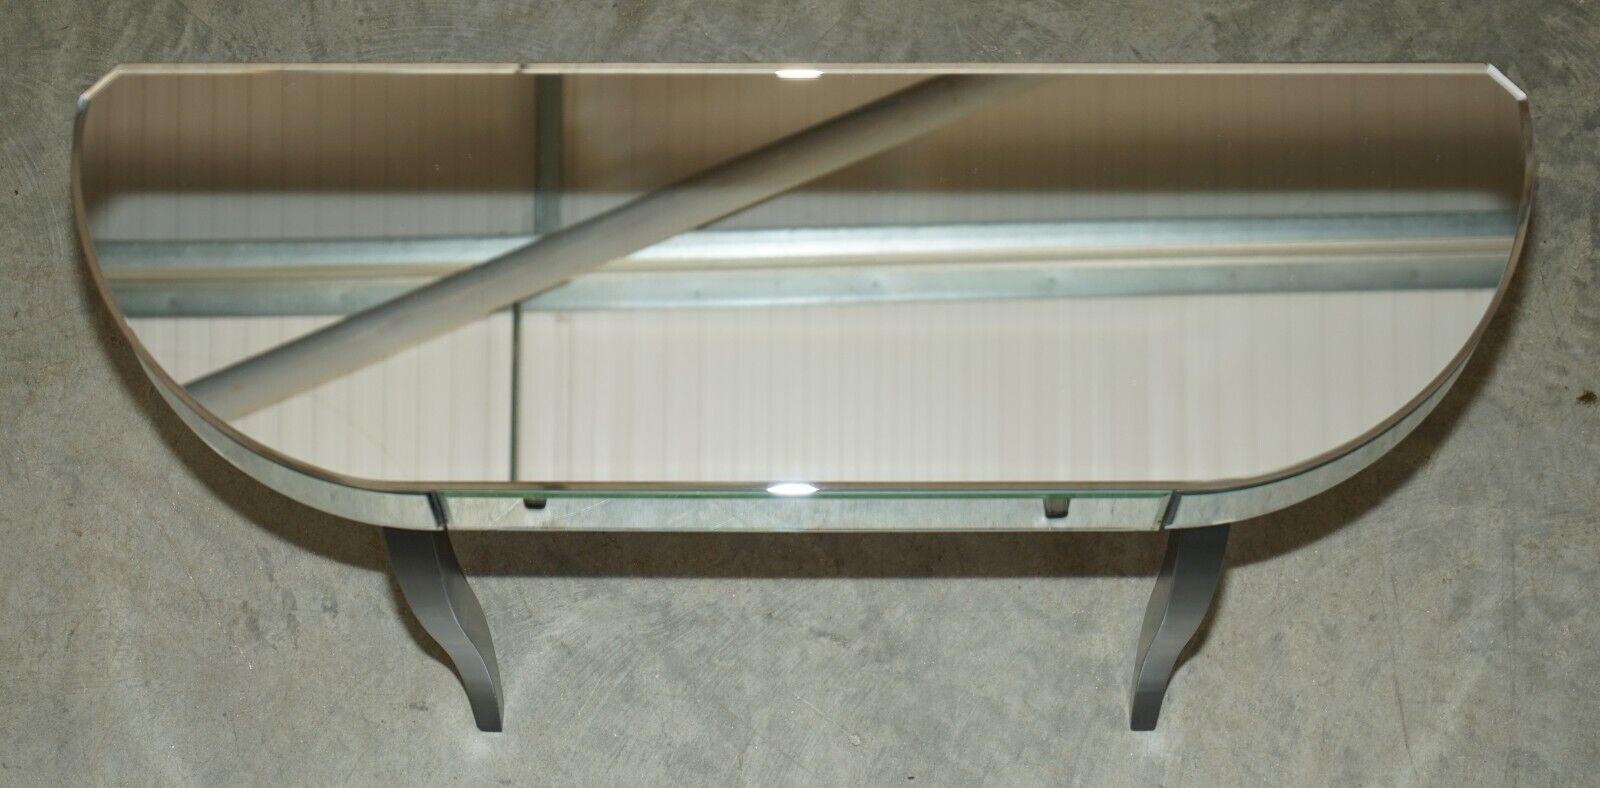 MIRRORED SINGLE DRAWER DEMI LUNE CONSOLE TABLE ELEGENT EBONiSED LETS PART OF SET 2